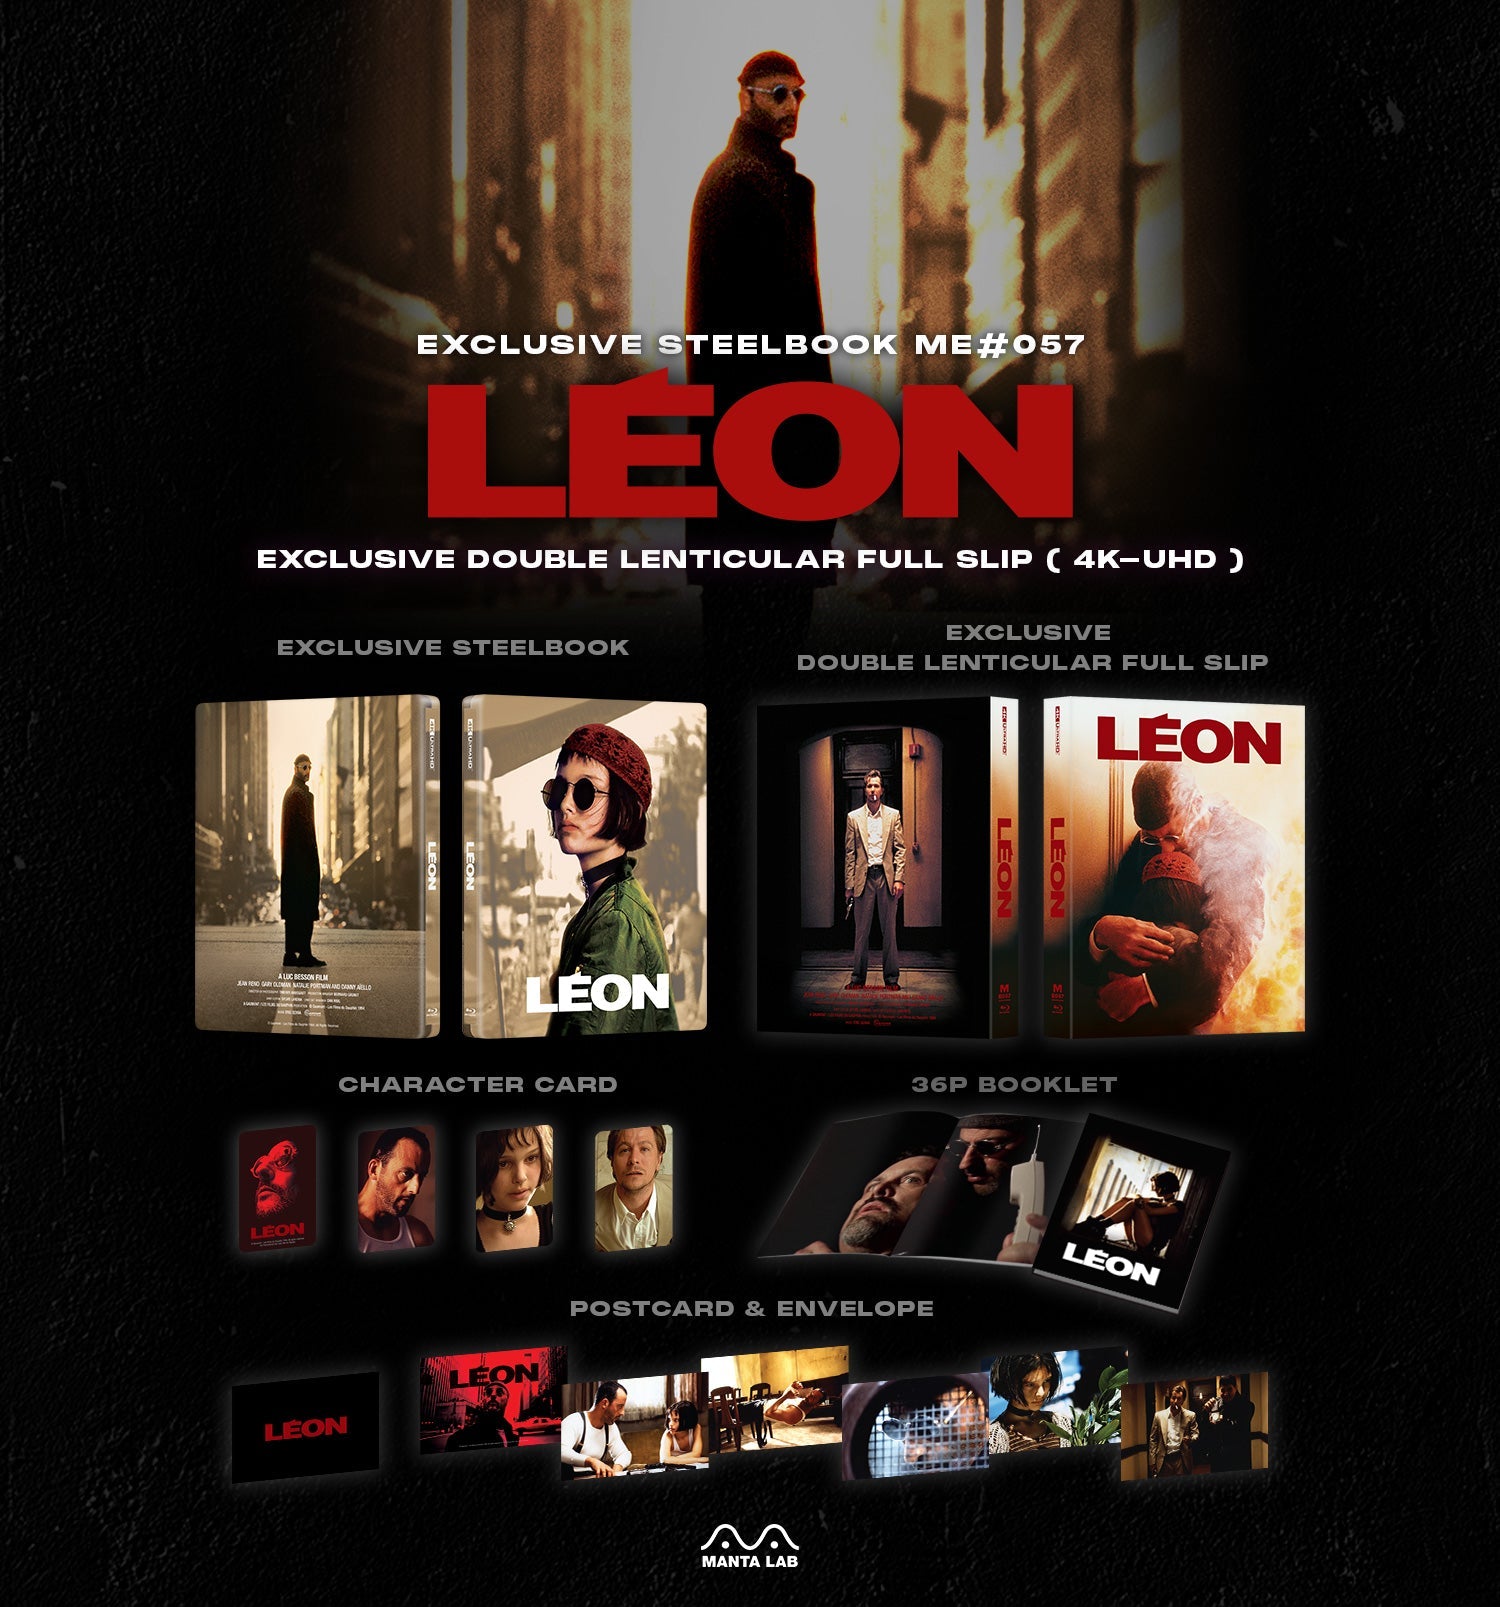 Leon Limited Edition UK Exclusive 4K Ultra HD Steelbook (includes